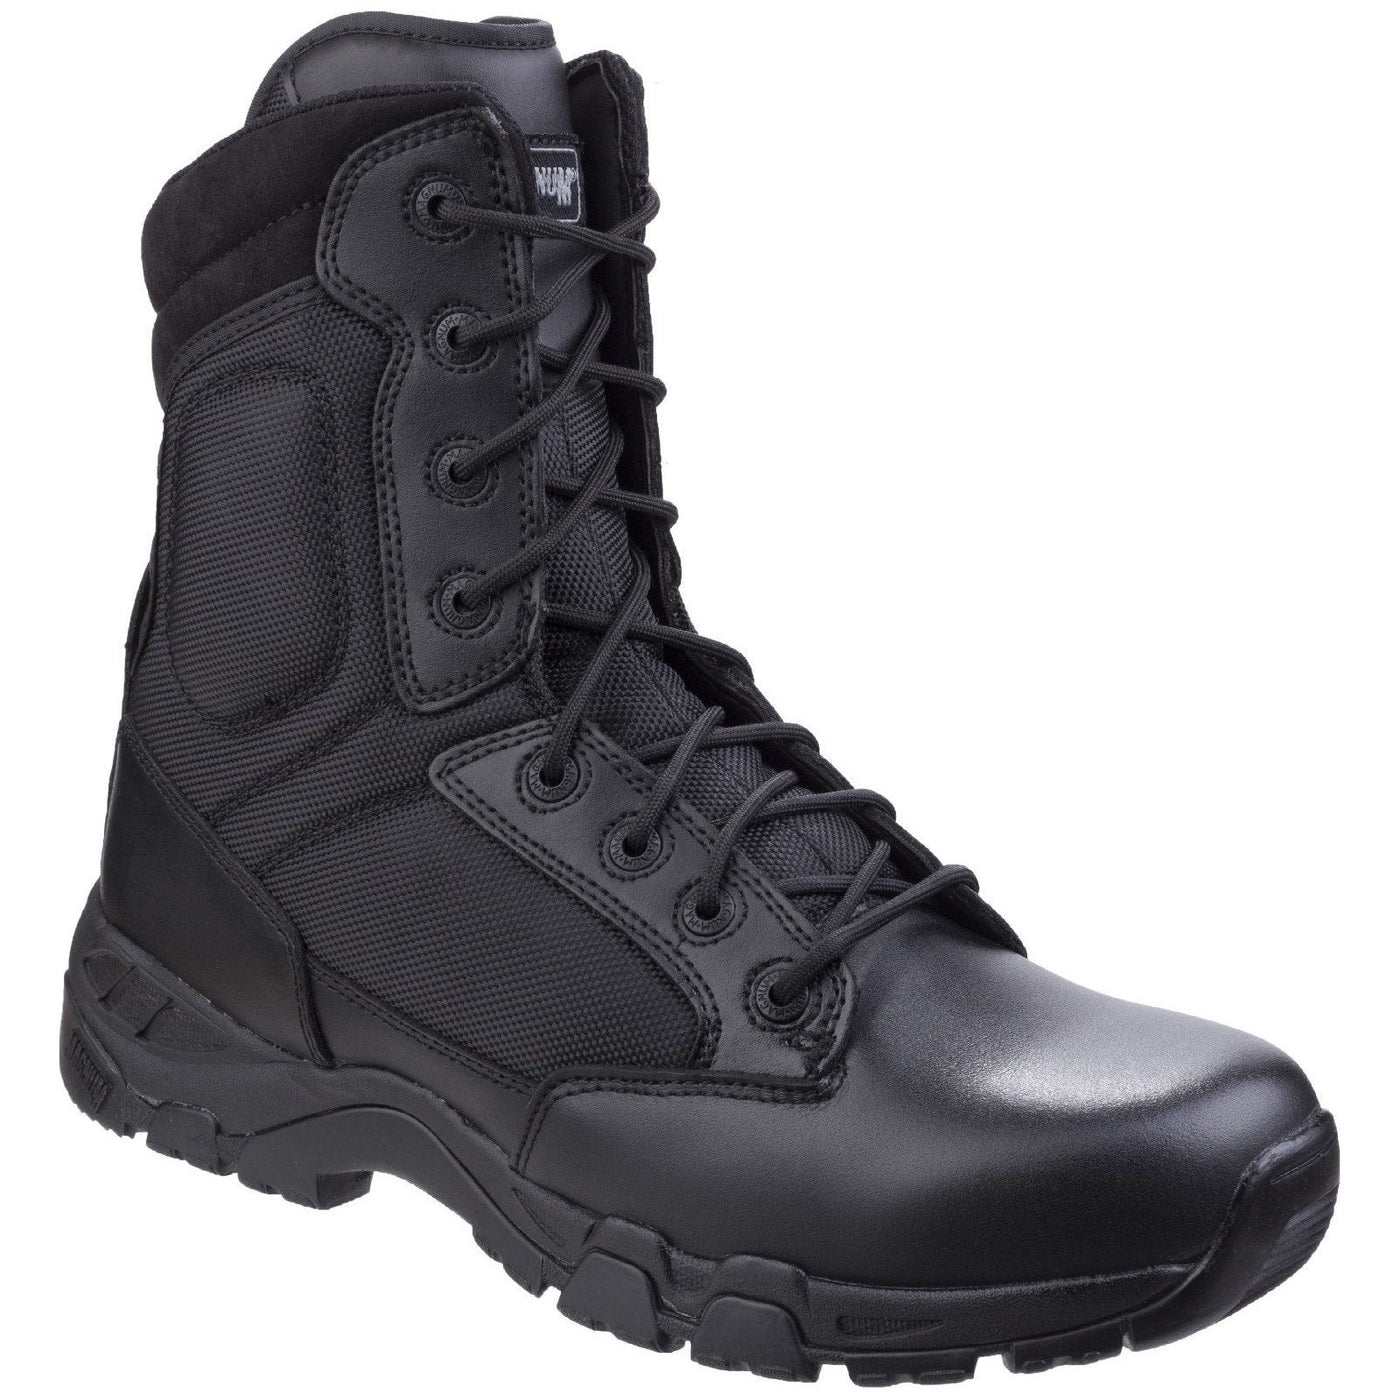 Magnum Viper Pro 8.0 Safety Boots Womens